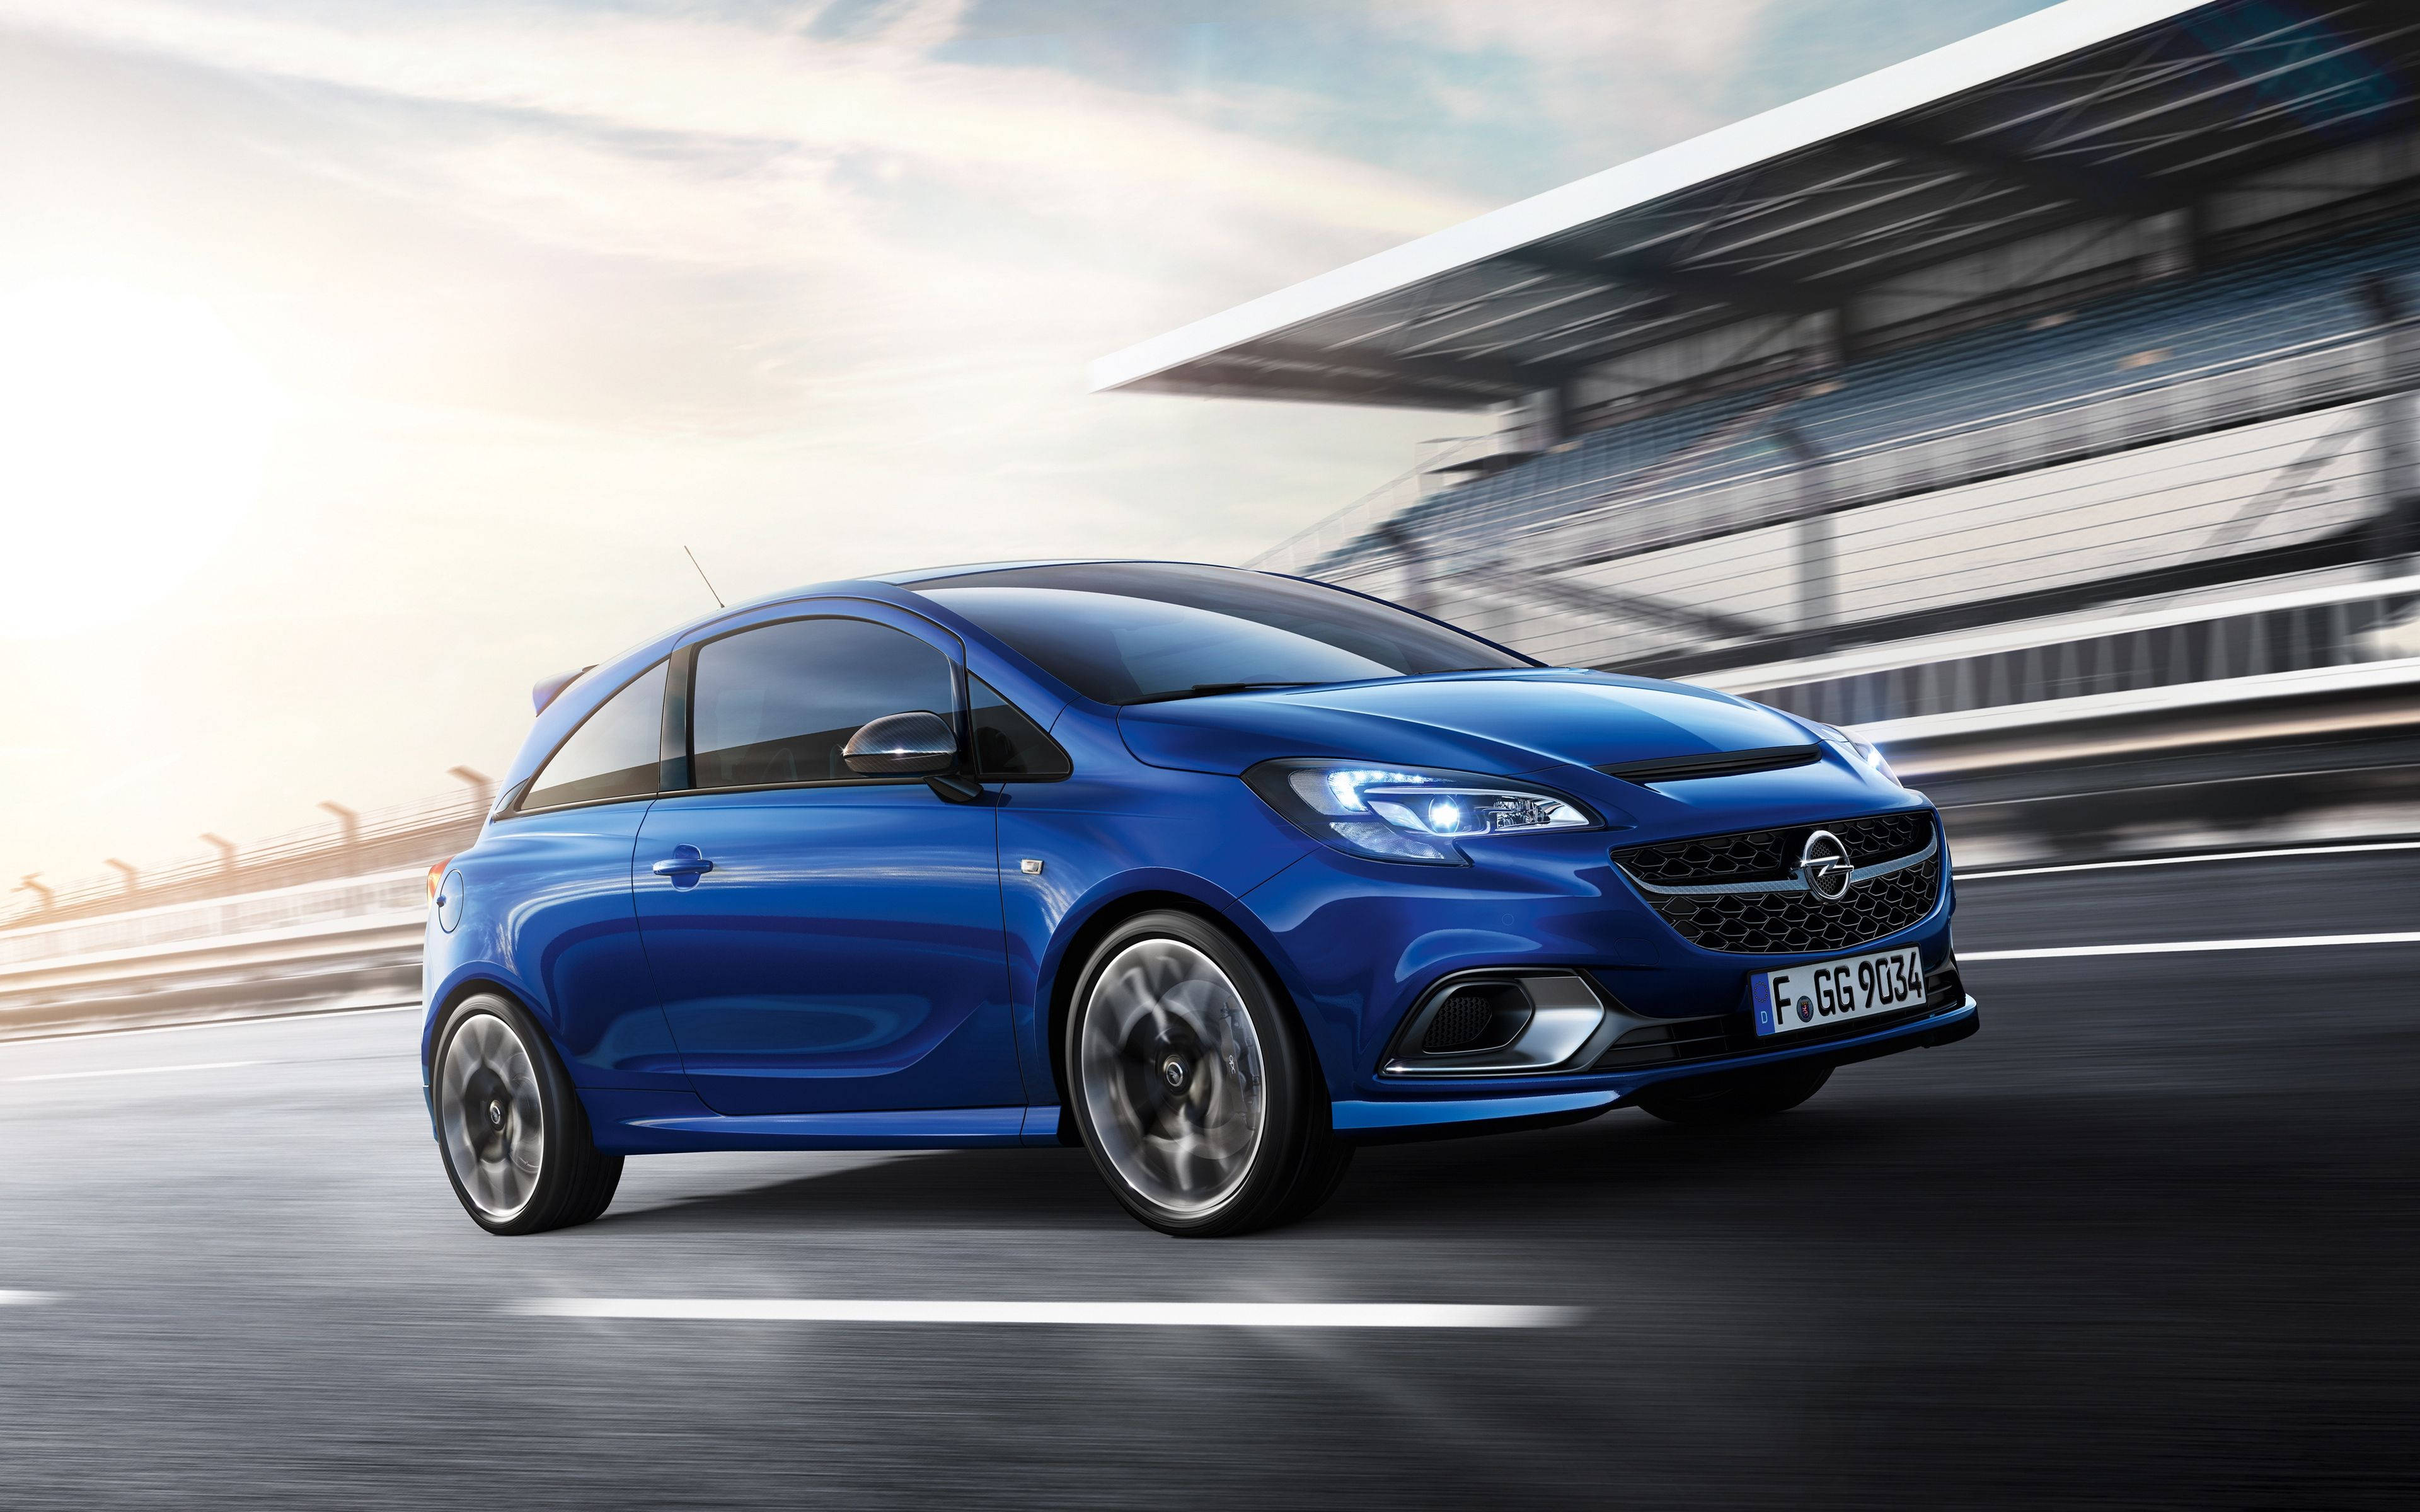 Opel Corsa Blue On Drive Background